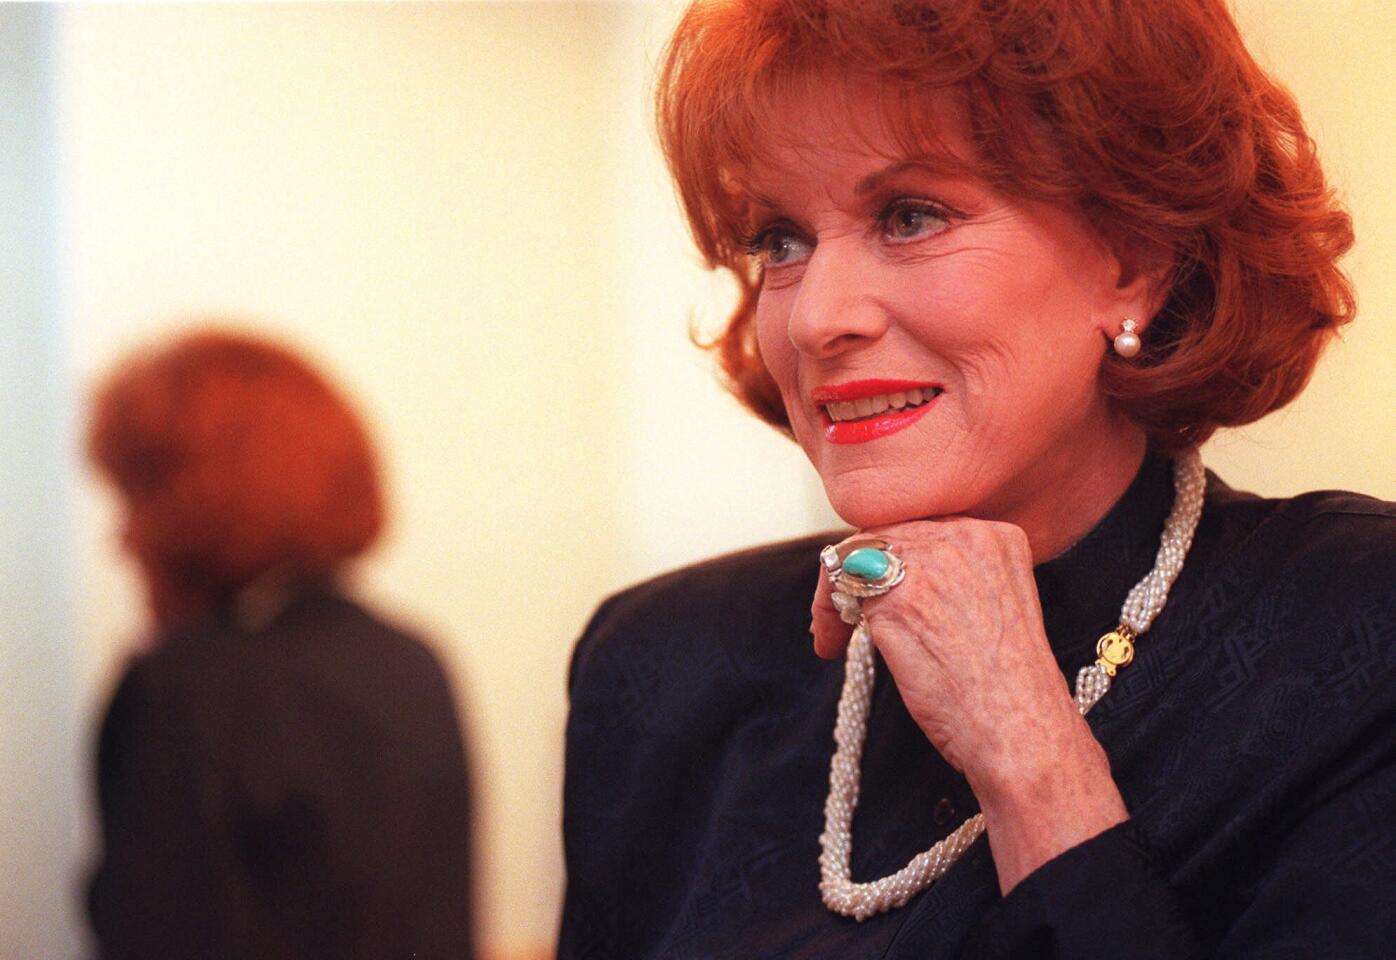 Maureen O'Hara is seen before her appearance on the "Tom Snyder Show" on Nov. 12, 1998.